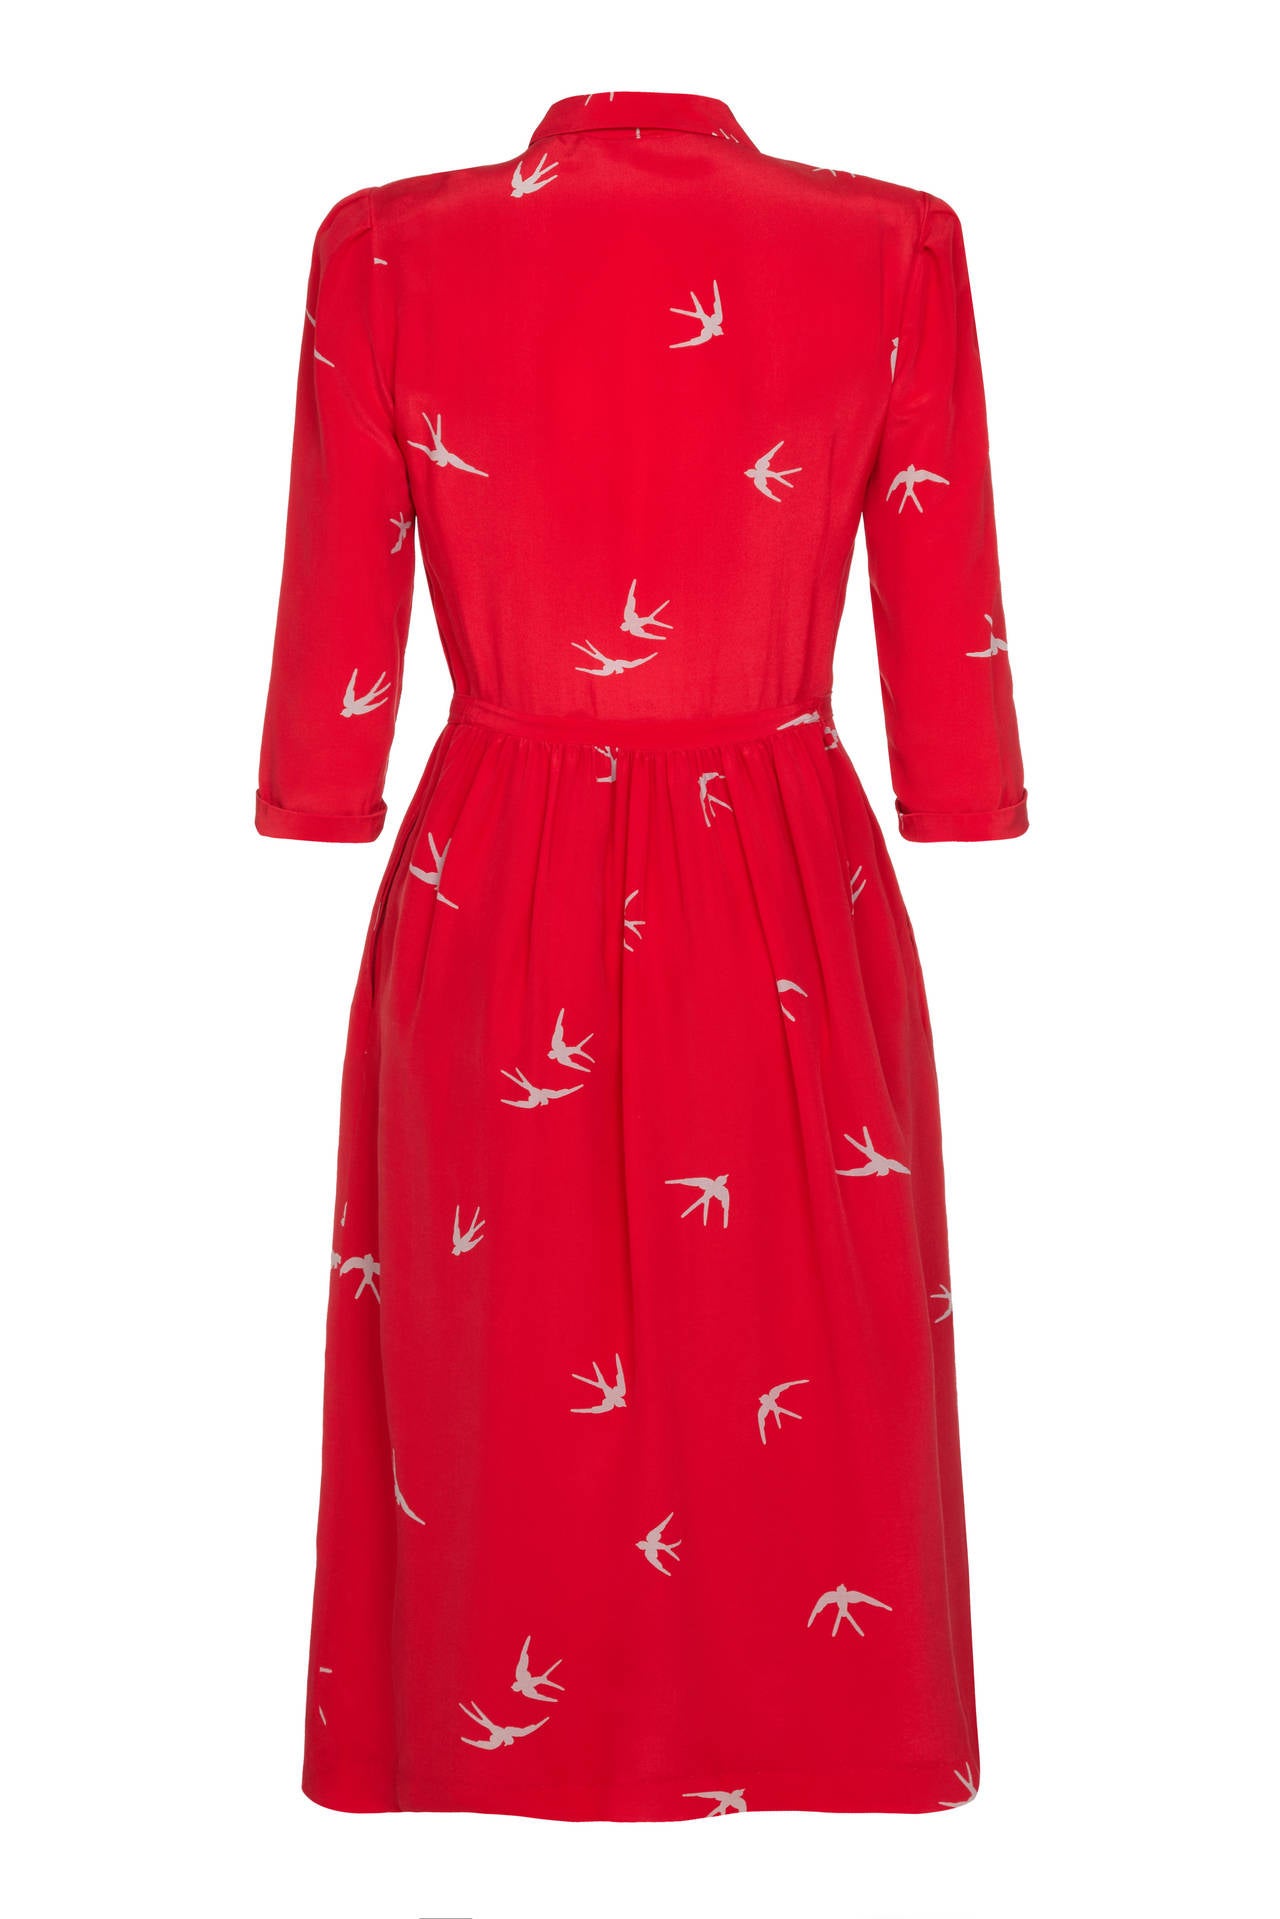 Great 70s shirt dress by Cacharel in red silk with a pretty grey bird print. It features ¾ length sleeves, ivory buttons to fasten at the front and matching original belt.  There are two pockets to the hip of the below the knee skirt and it is